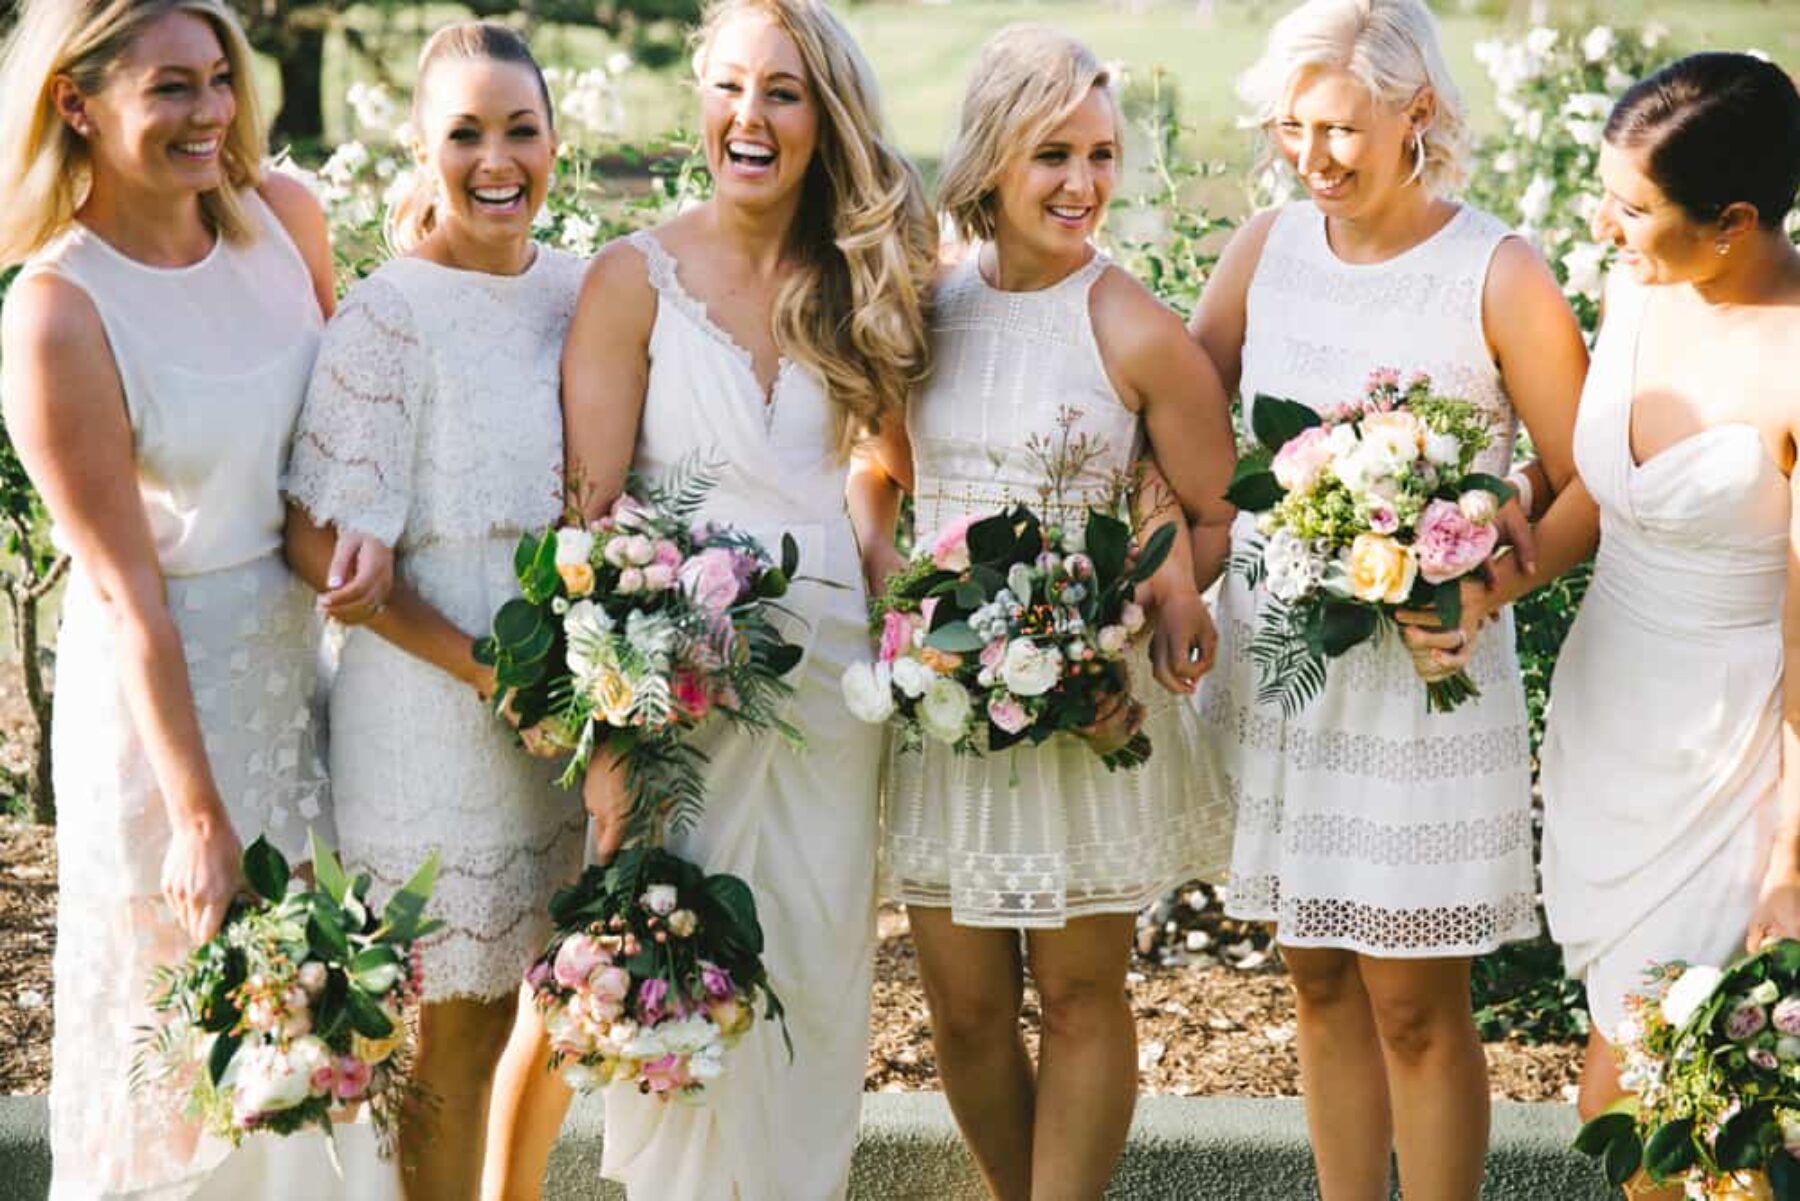 Bridesmaids in different white dresses / Kait Photography